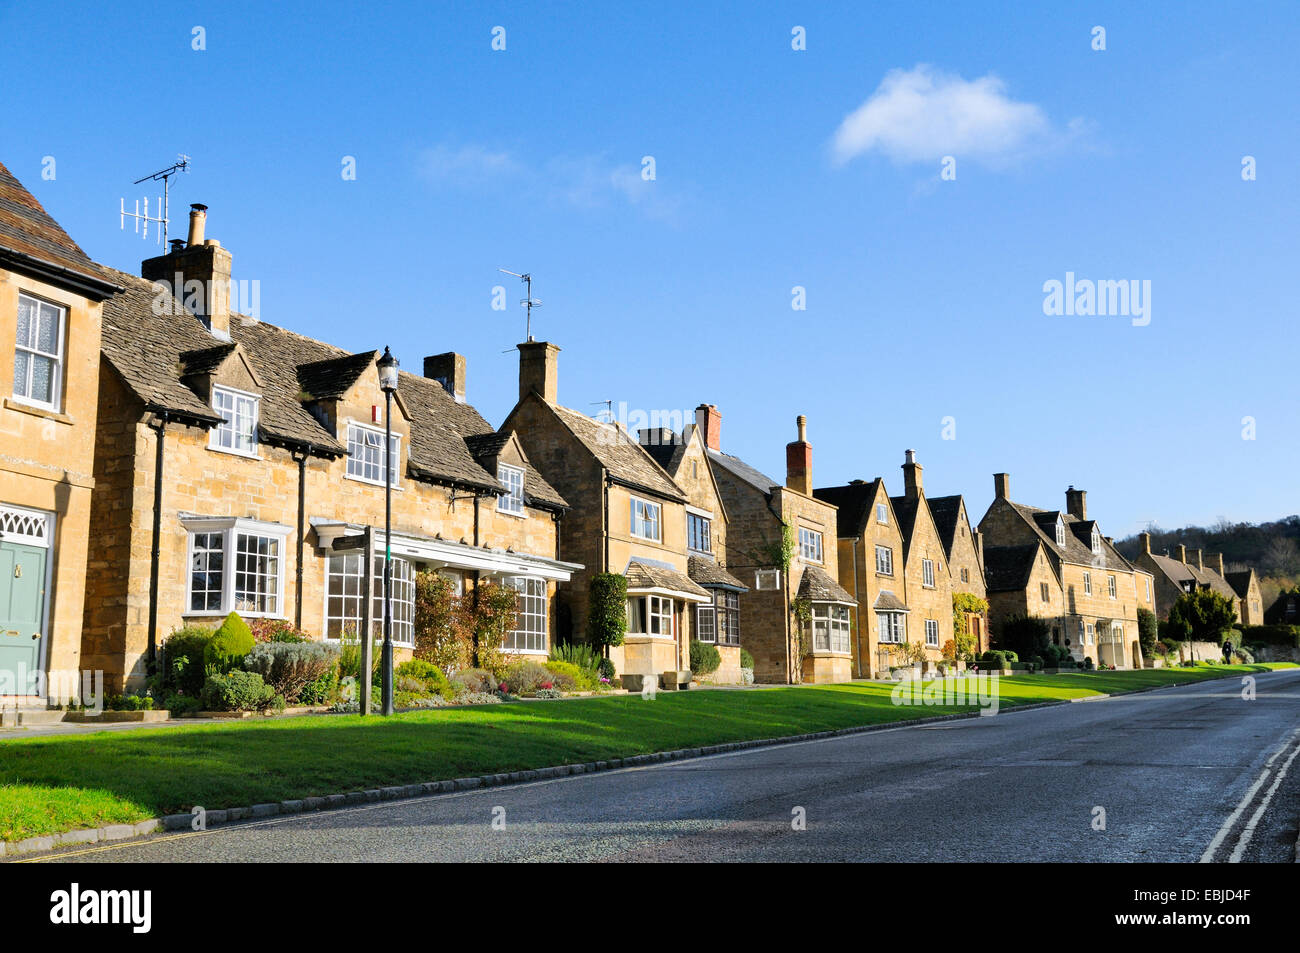 Traditional stone cottages in Broadway, Cotswolds, Worcestershire, England, UK Stock Photo